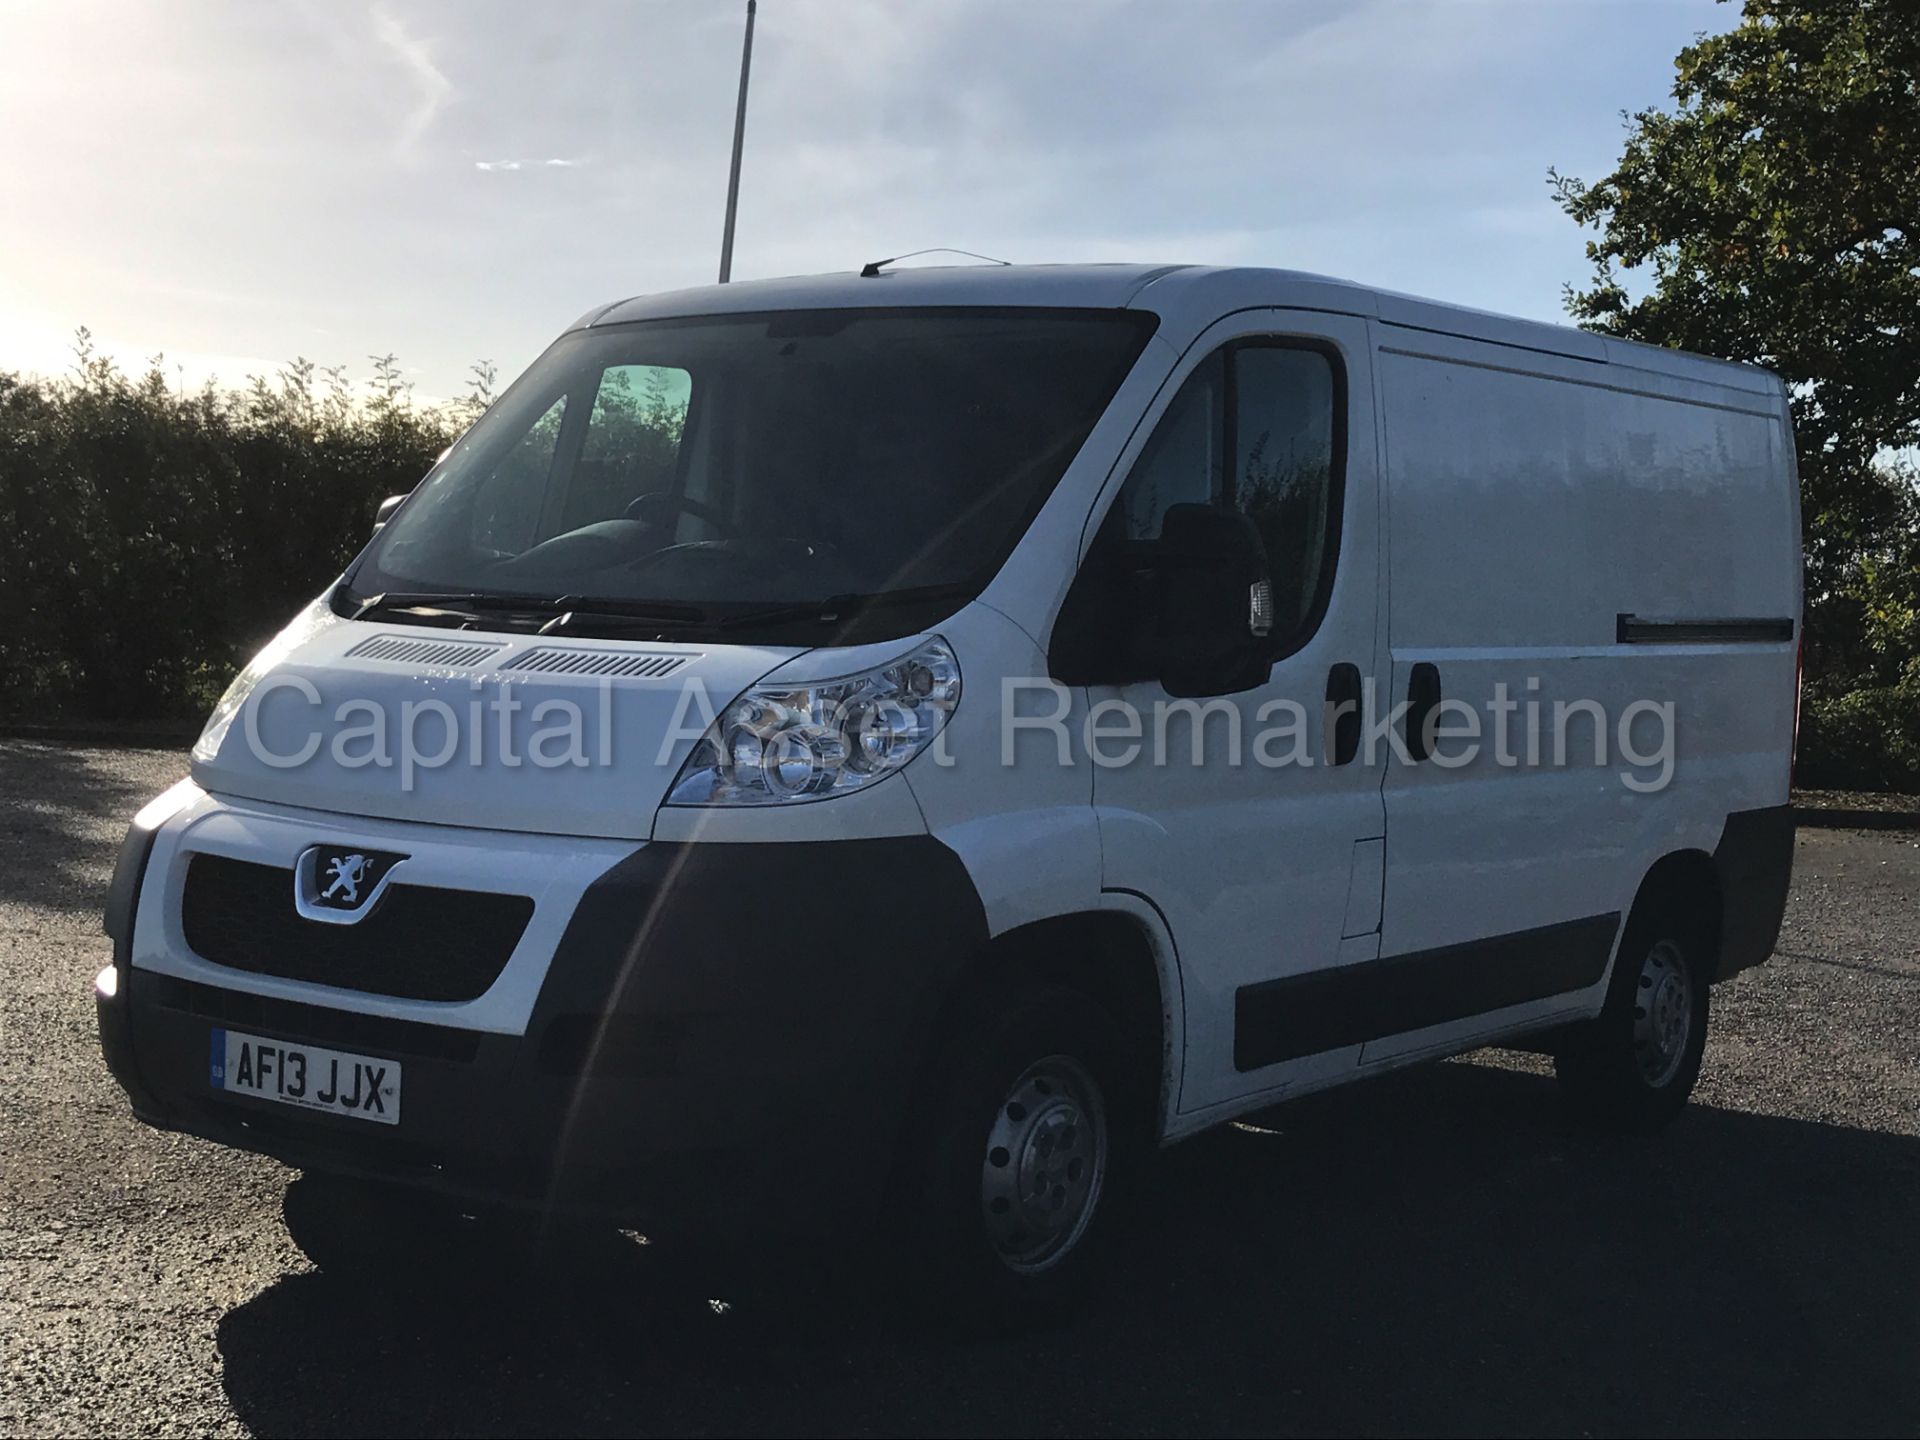 PEUGEOT BOXER 330 L1H1 (2013 - 13 REG) 'SWB - 2.2 HDI - 6 SPEED' (1 OWNER FROM NEW) **LOW MILES** - Image 4 of 19